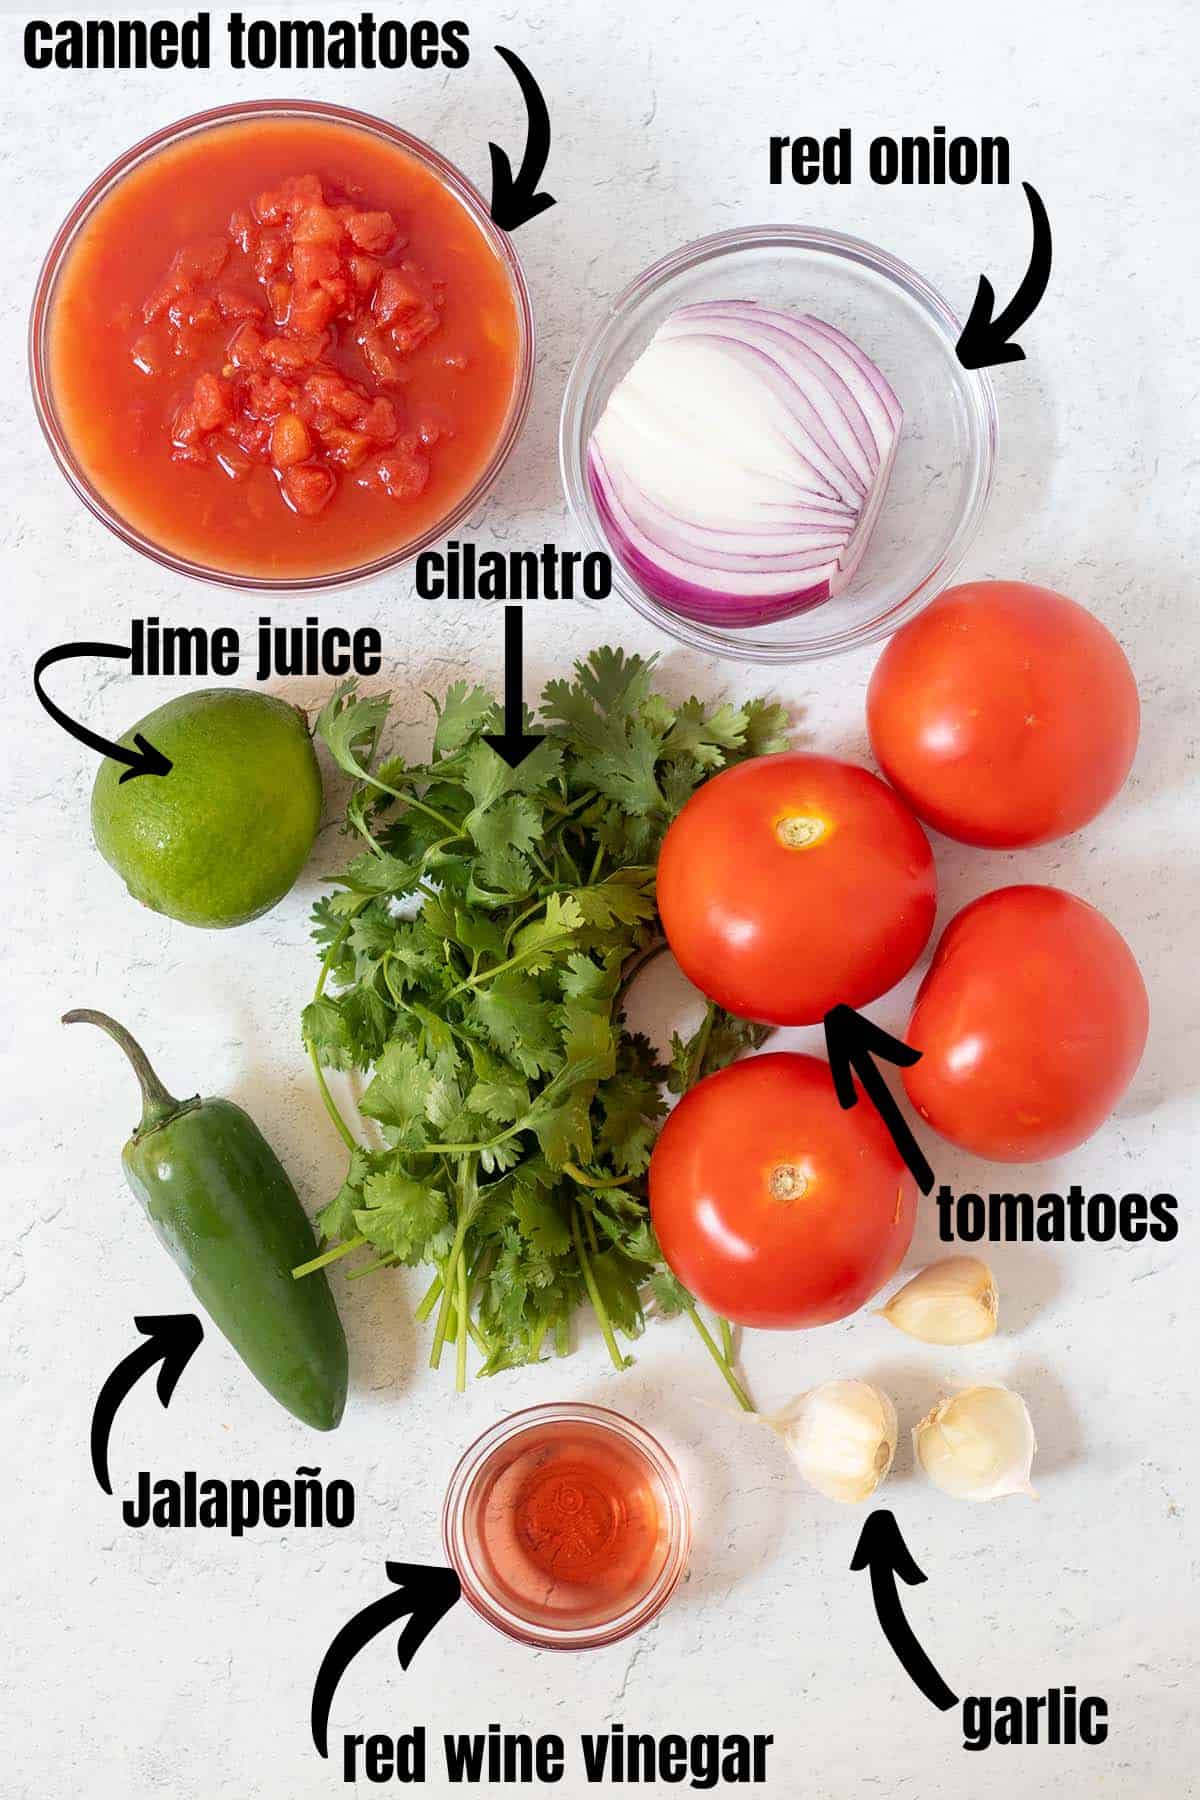 Homemade salsa recipe ingredients. Canned tomatoes, red onion, cilantro, a lime, fresh tomatoes, jalapeno, garlic and red wine vinegar.